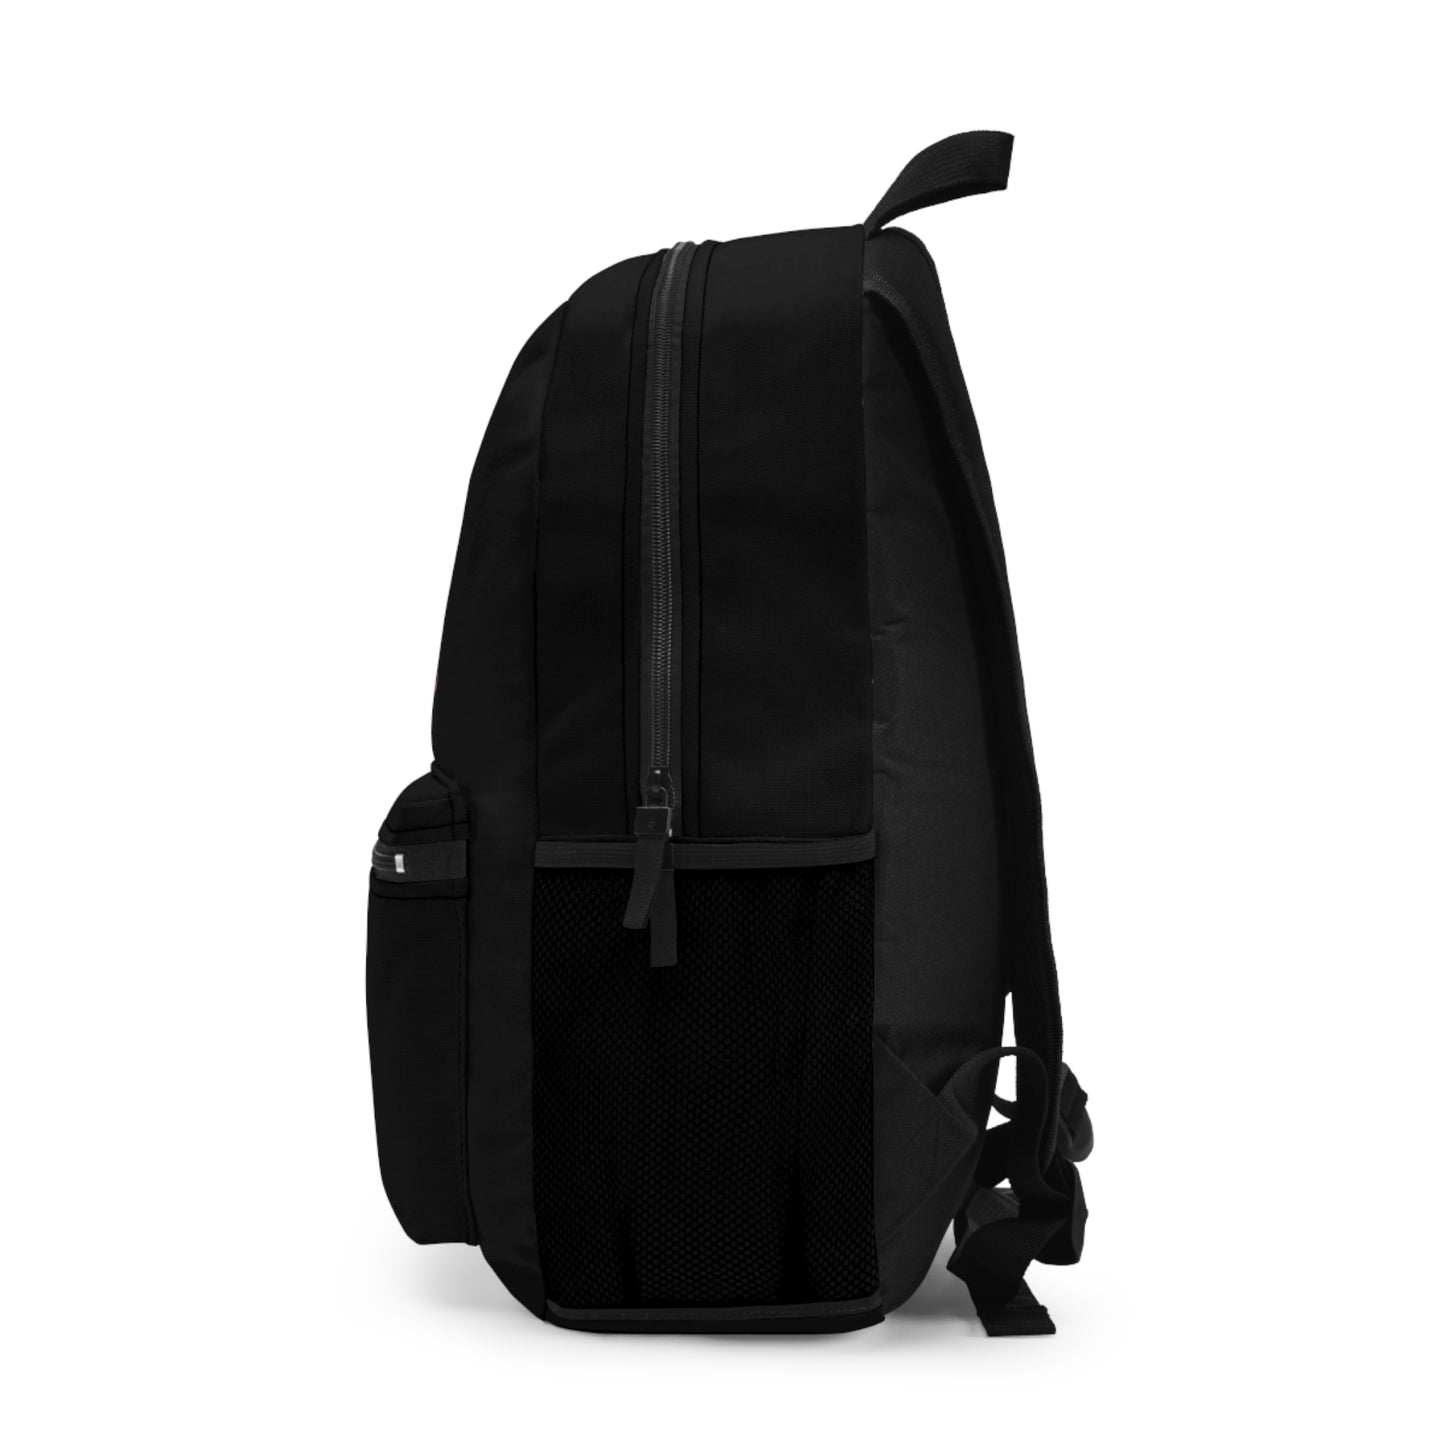 Copy of Collect Sweet Moments Backpack